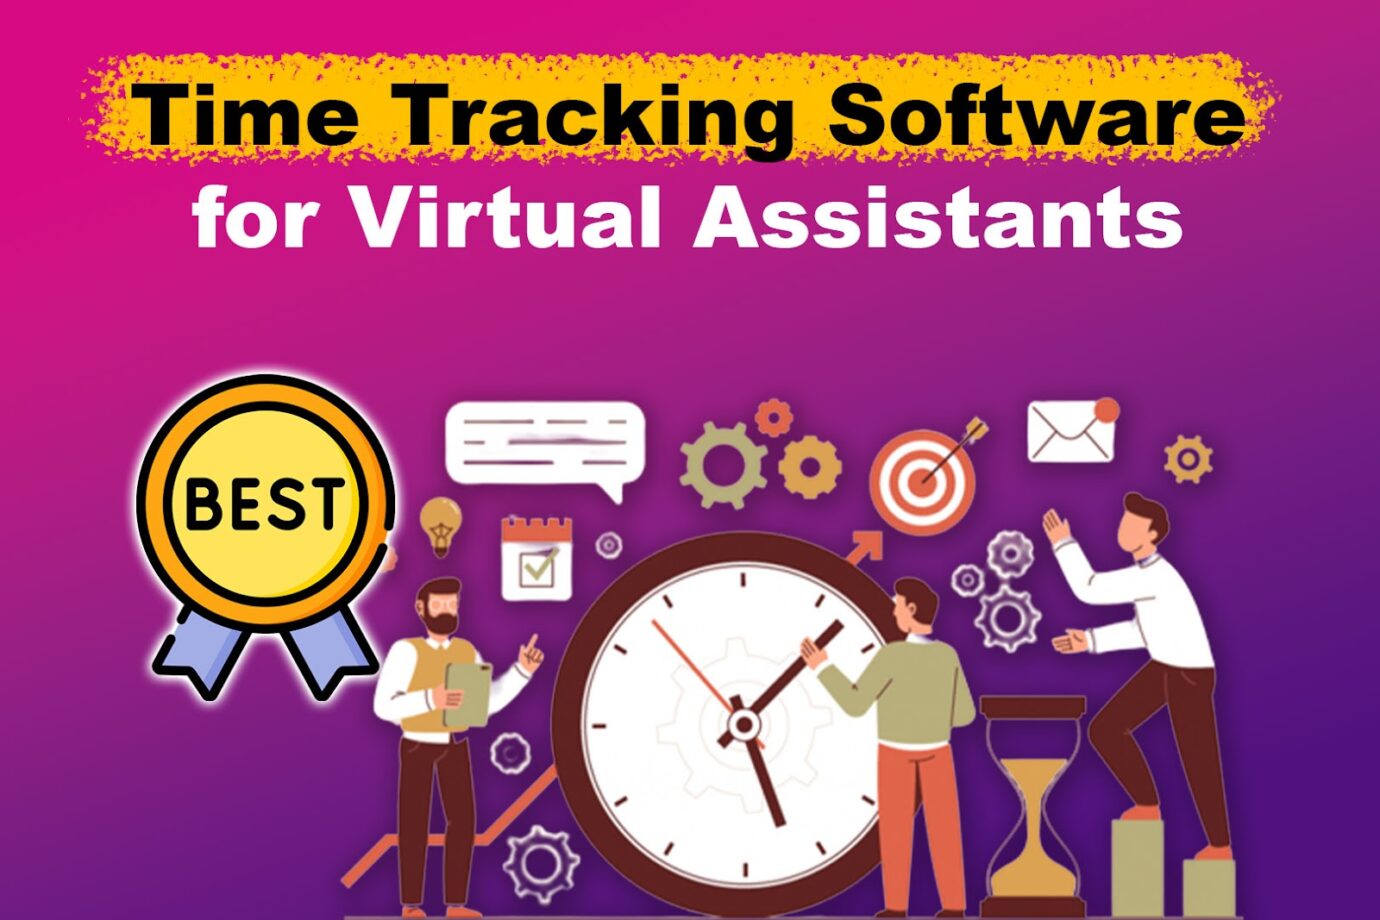 Time Tracking Software for Virtual Assistants